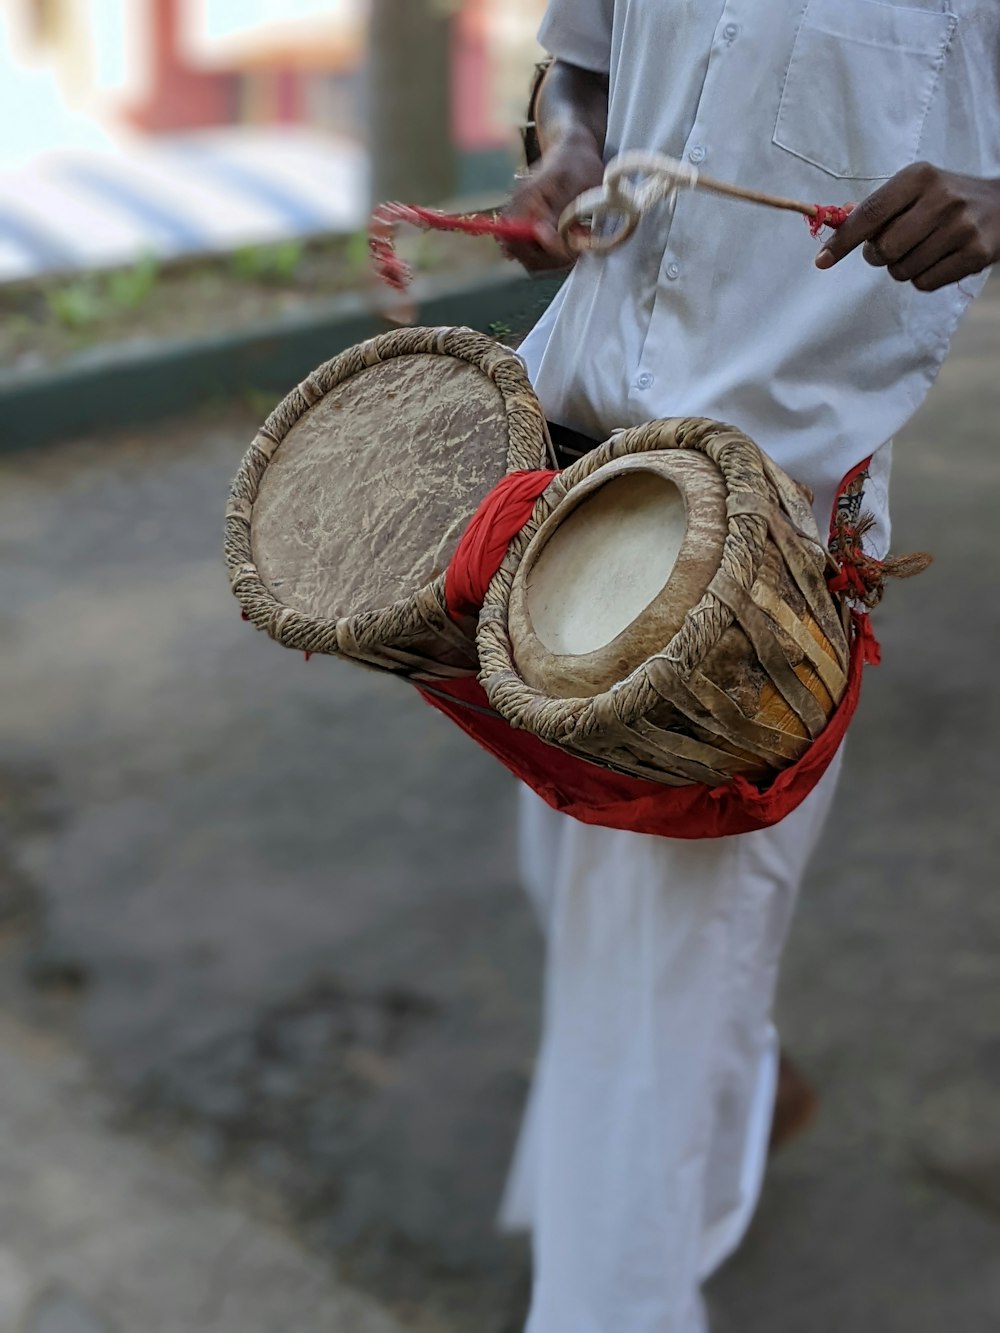 a man holding a basket and two drums